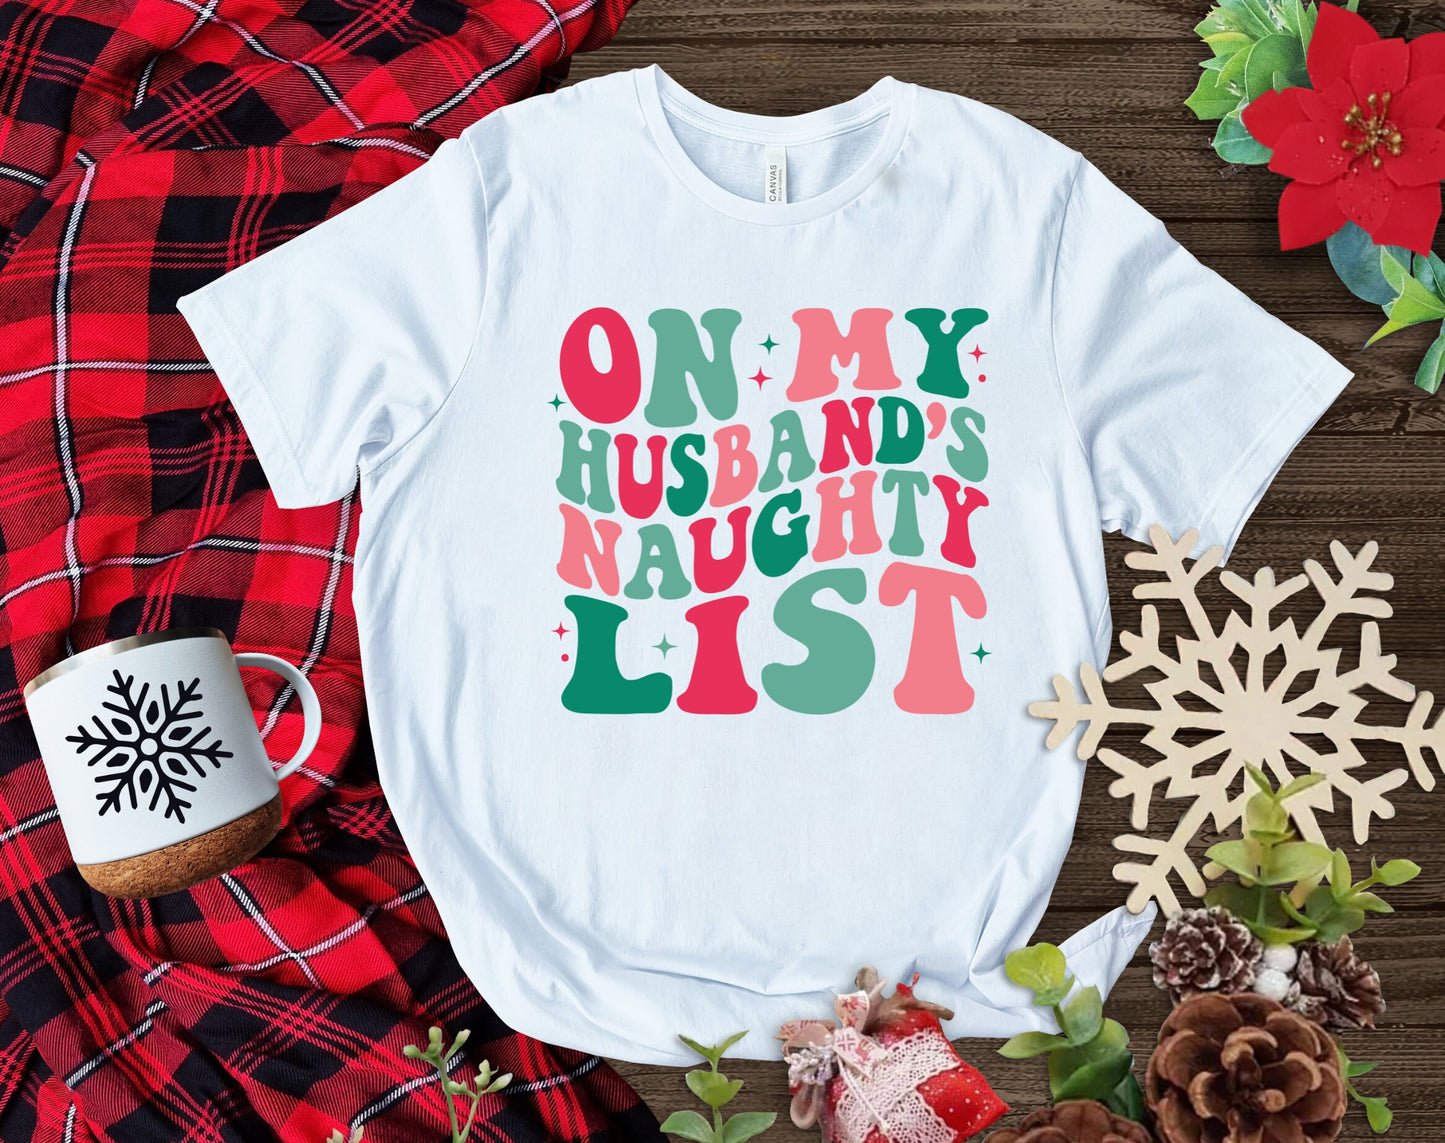 The On My Husbands Naughty List Christmas Shirt Makes the Perfect Gift for Friends, Family, Coworkers or yourself.  Check Out My Shop for even more Great Designs.  www.scorpiontees.etsy.com